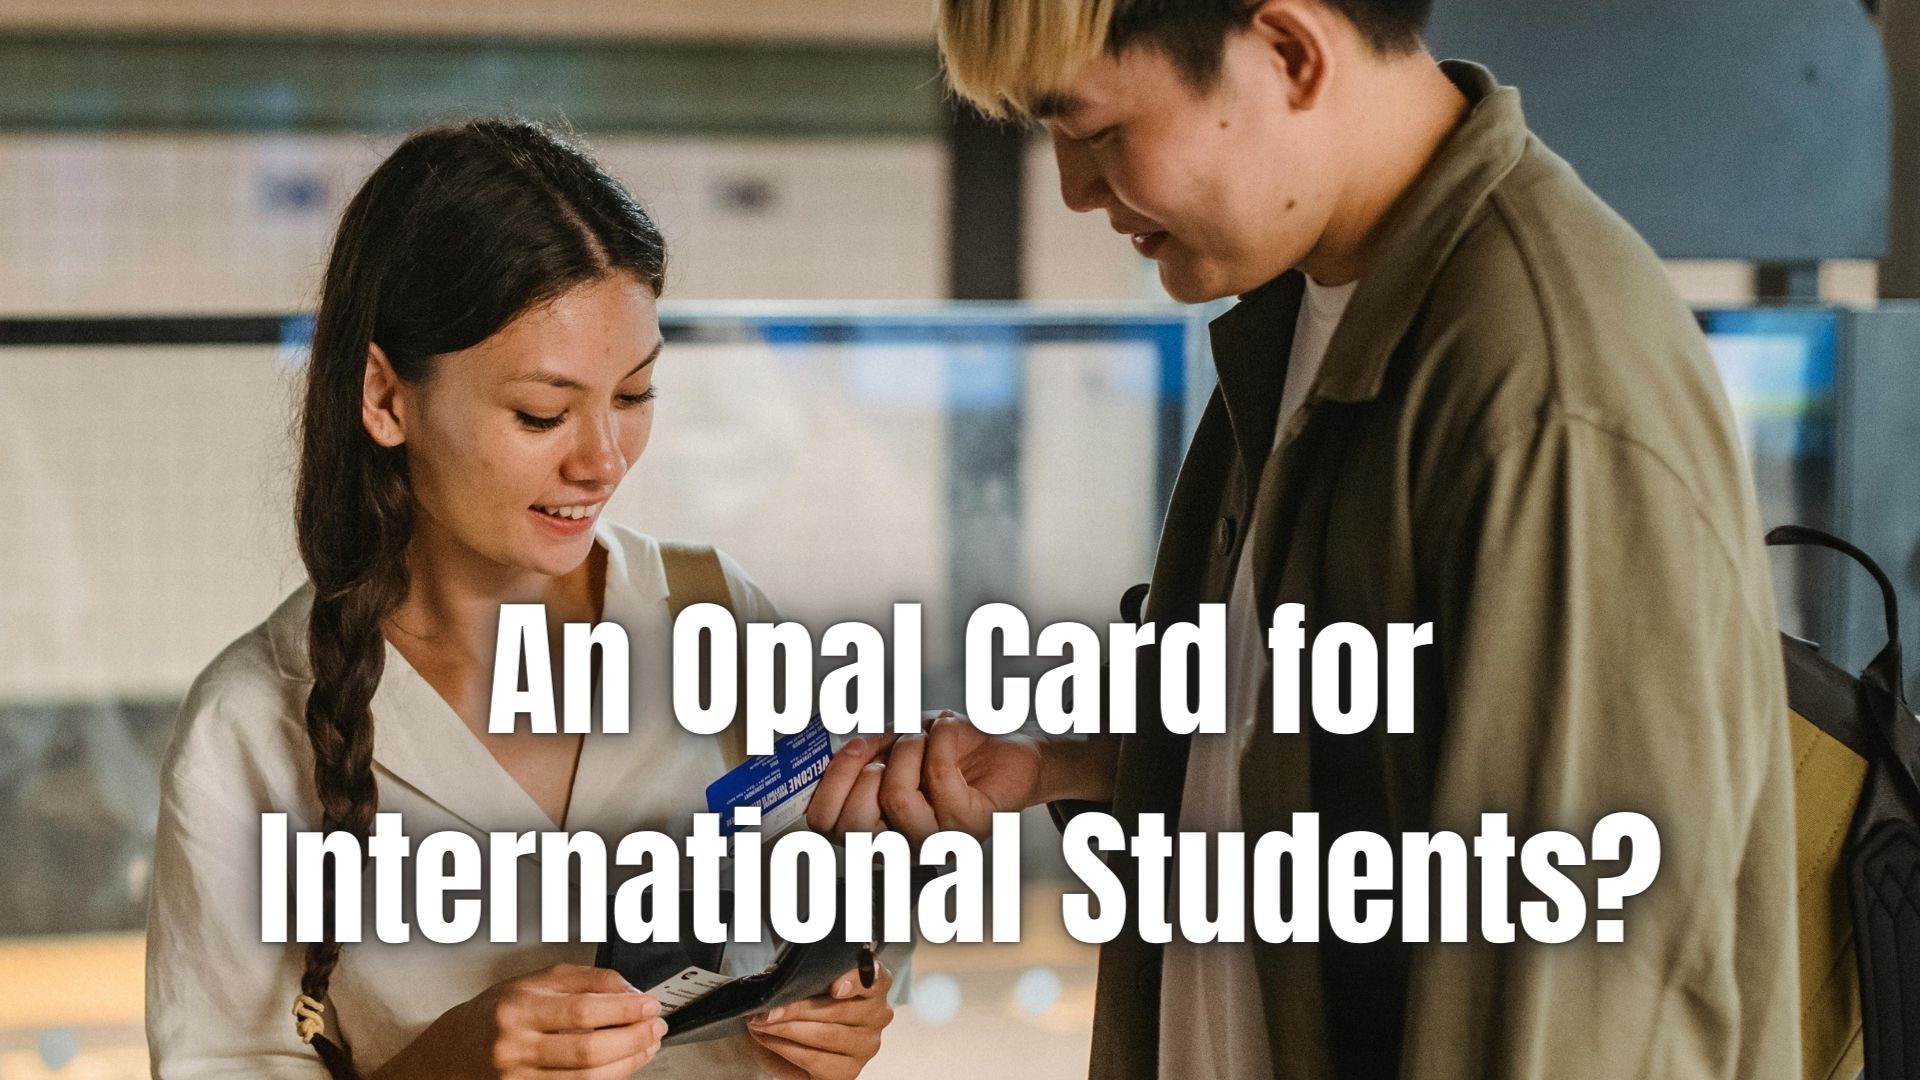 Confused about Opal Cards for International Students? We explain eligibility, benefits & how to apply. Save on Sydney transport!